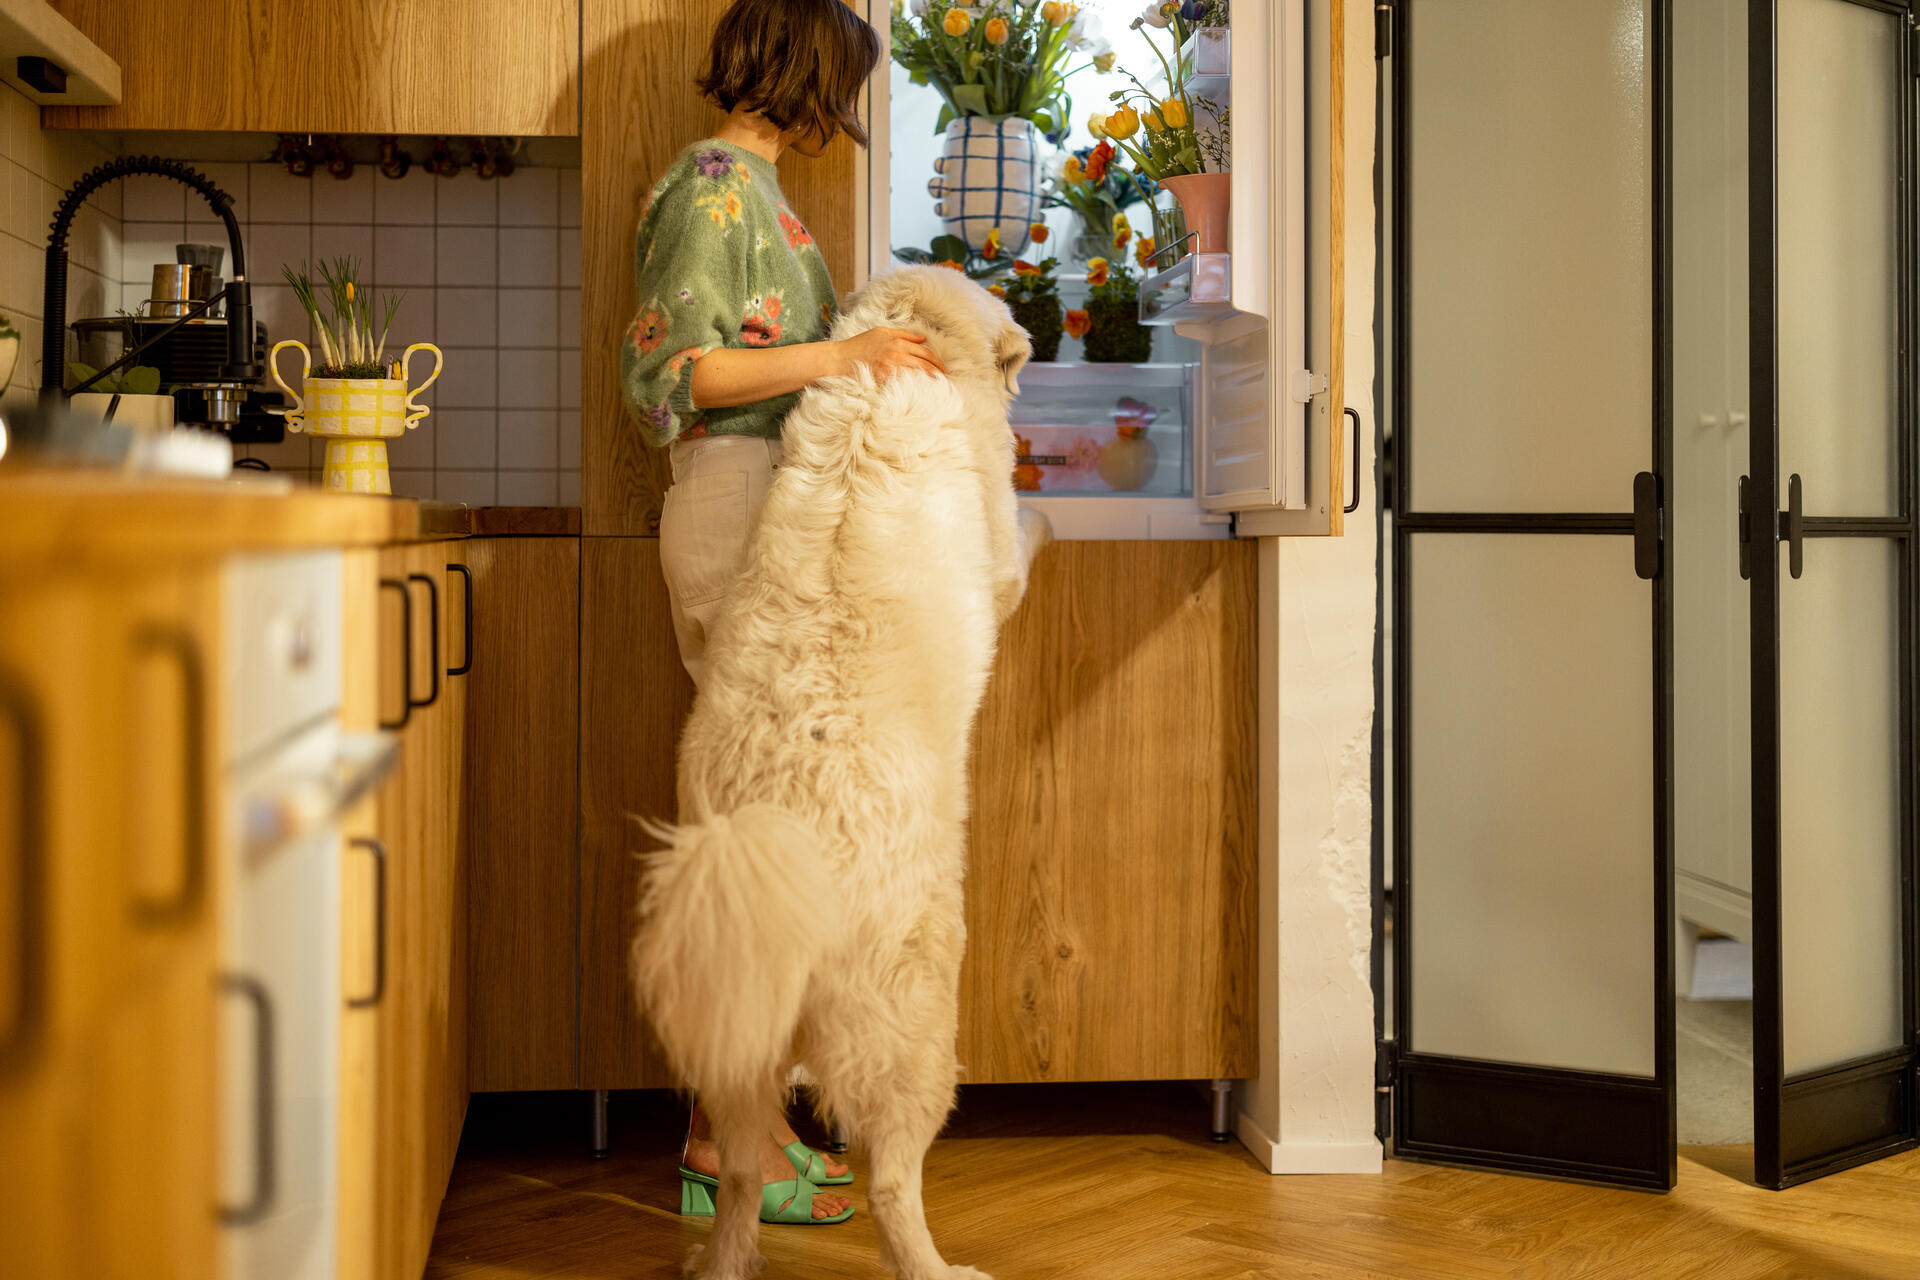 A woman and her dog inspecting a kitchen fridge